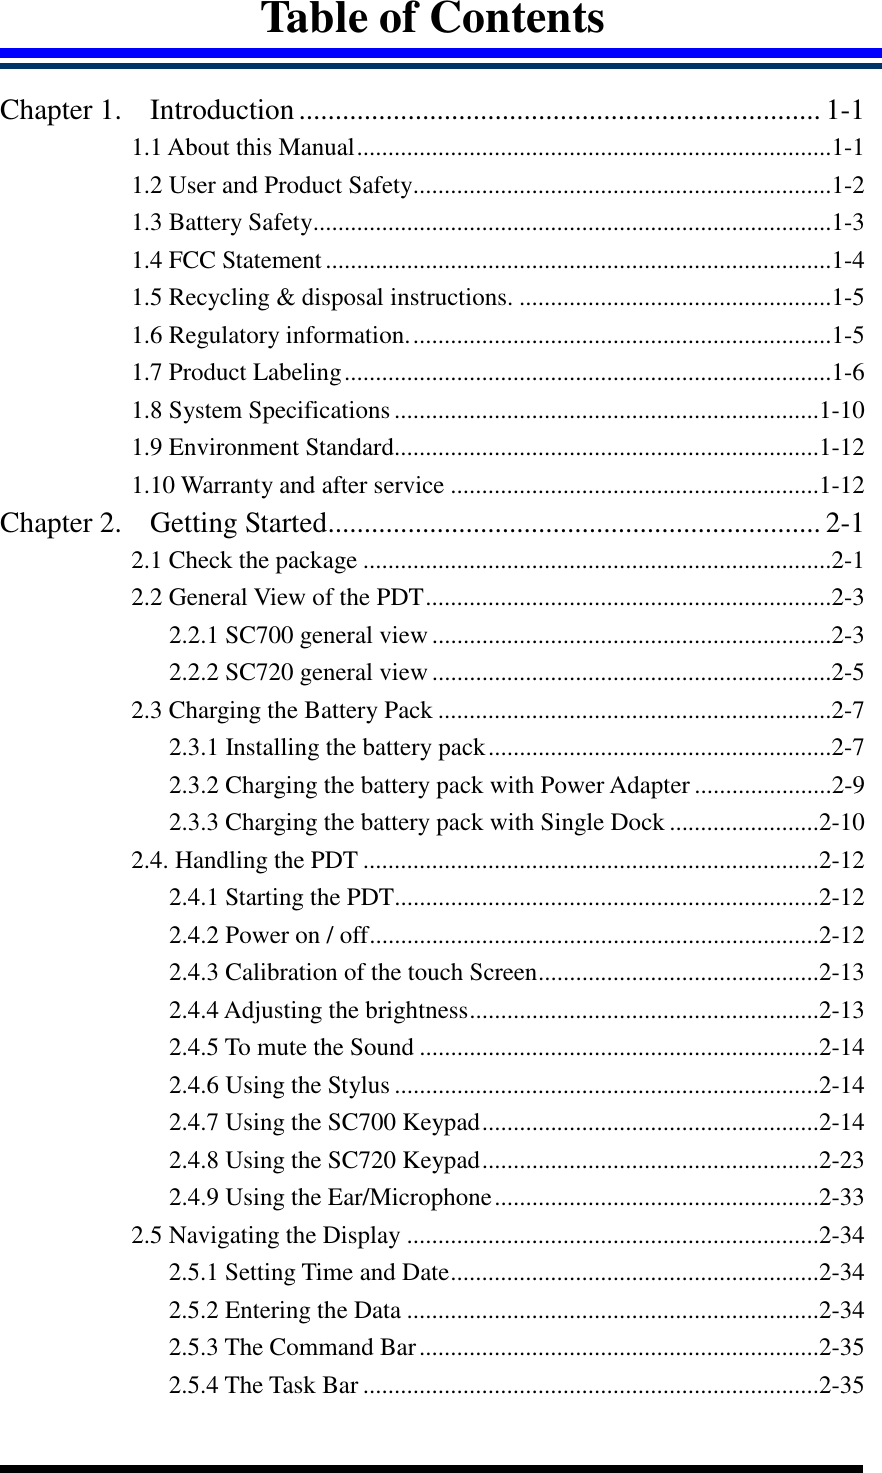  Table of Contents  Chapter 1. Introduction........................................................................ 1-1 1.1 About this Manual............................................................................1-1 1.2 User and Product Safety...................................................................1-2 1.3 Battery Safety...................................................................................1-3 1.4 FCC Statement.................................................................................1-4 1.5 Recycling &amp; disposal instructions. ..................................................1-5 1.6 Regulatory information....................................................................1-5 1.7 Product Labeling..............................................................................1-6 1.8 System Specifications ....................................................................1-10 1.9 Environment Standard....................................................................1-12 1.10 Warranty and after service ...........................................................1-12 Chapter 2. Getting Started.................................................................... 2-1 2.1 Check the package ...........................................................................2-1 2.2 General View of the PDT.................................................................2-3 2.2.1 SC700 general view ................................................................2-3 2.2.2 SC720 general view ................................................................2-5 2.3 Charging the Battery Pack ...............................................................2-7 2.3.1 Installing the battery pack.......................................................2-7 2.3.2 Charging the battery pack with Power Adapter ......................2-9 2.3.3 Charging the battery pack with Single Dock ........................2-10 2.4. Handling the PDT .........................................................................2-12 2.4.1 Starting the PDT....................................................................2-12 2.4.2 Power on / off........................................................................2-12 2.4.3 Calibration of the touch Screen.............................................2-13 2.4.4 Adjusting the brightness........................................................2-13 2.4.5 To mute the Sound ................................................................2-14 2.4.6 Using the Stylus ....................................................................2-14 2.4.7 Using the SC700 Keypad......................................................2-14 2.4.8 Using the SC720 Keypad......................................................2-23 2.4.9 Using the Ear/Microphone....................................................2-33 2.5 Navigating the Display ..................................................................2-34 2.5.1 Setting Time and Date...........................................................2-34 2.5.2 Entering the Data ..................................................................2-34 2.5.3 The Command Bar................................................................2-35 2.5.4 The Task Bar .........................................................................2-35 